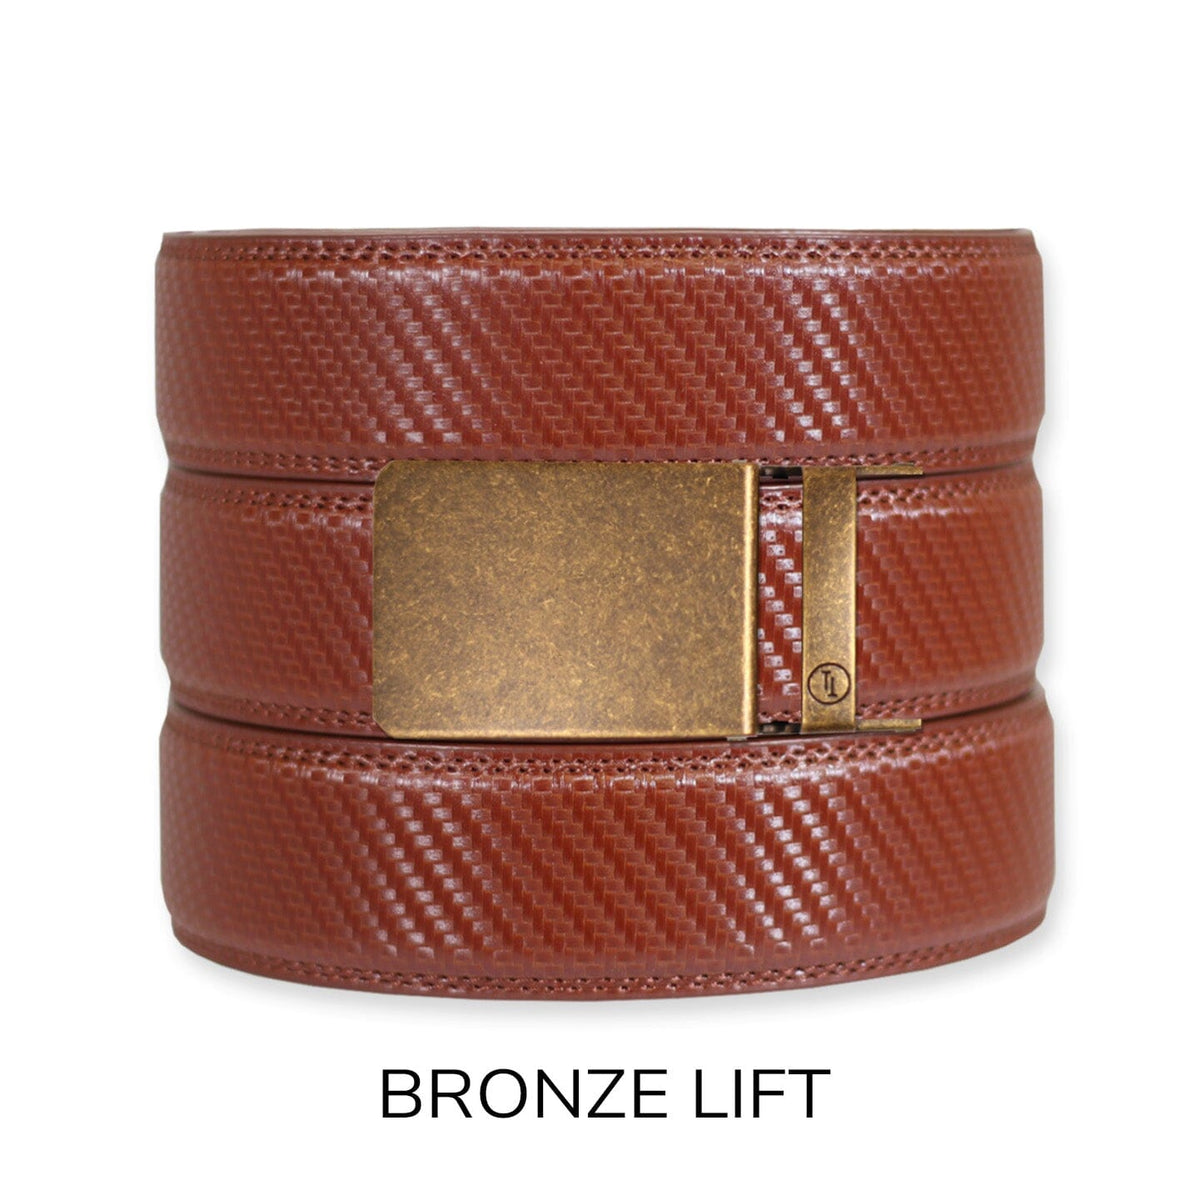 Louis Vuitton Belt (Real leather, 1:1 Rep, TOP QUALITY) from